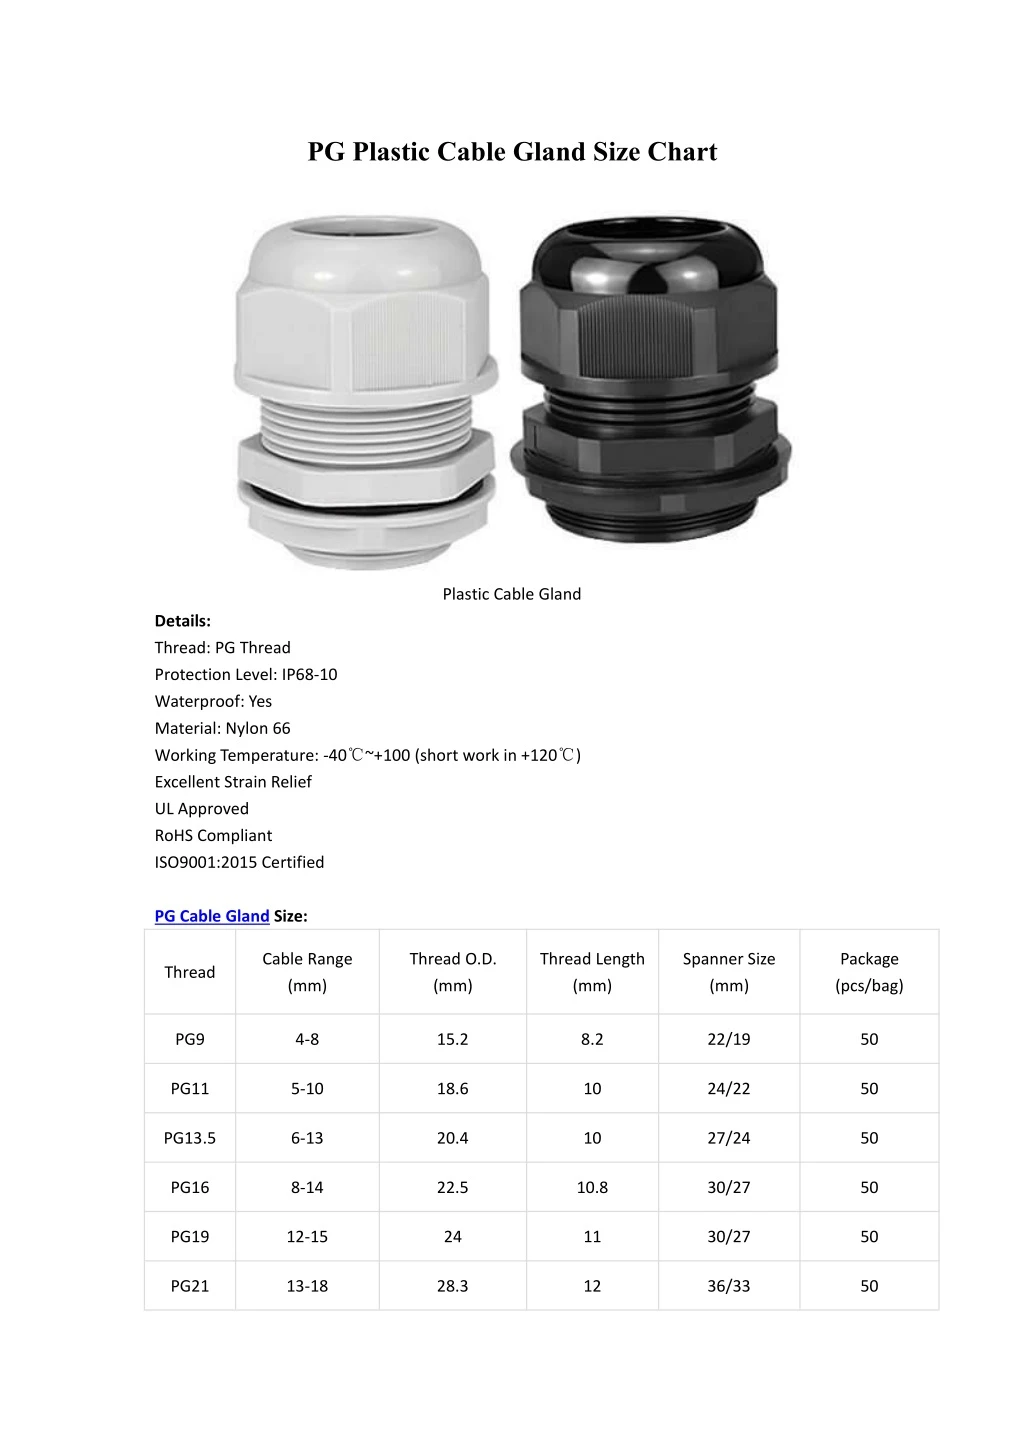 pg plastic cable gland size chart